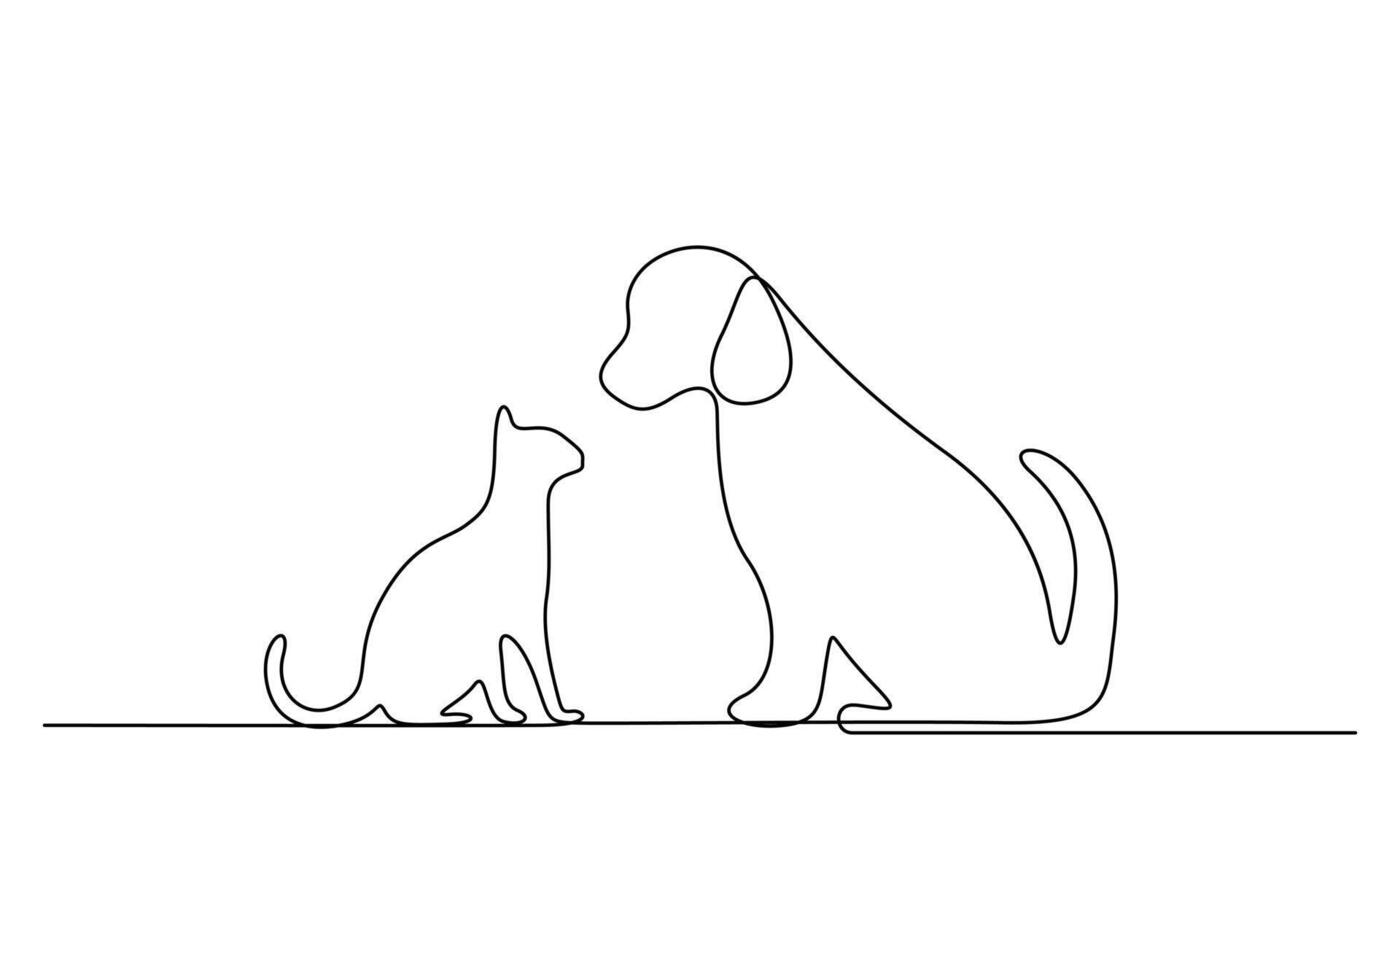 Cat and dog continuous one line drawing vector illustration